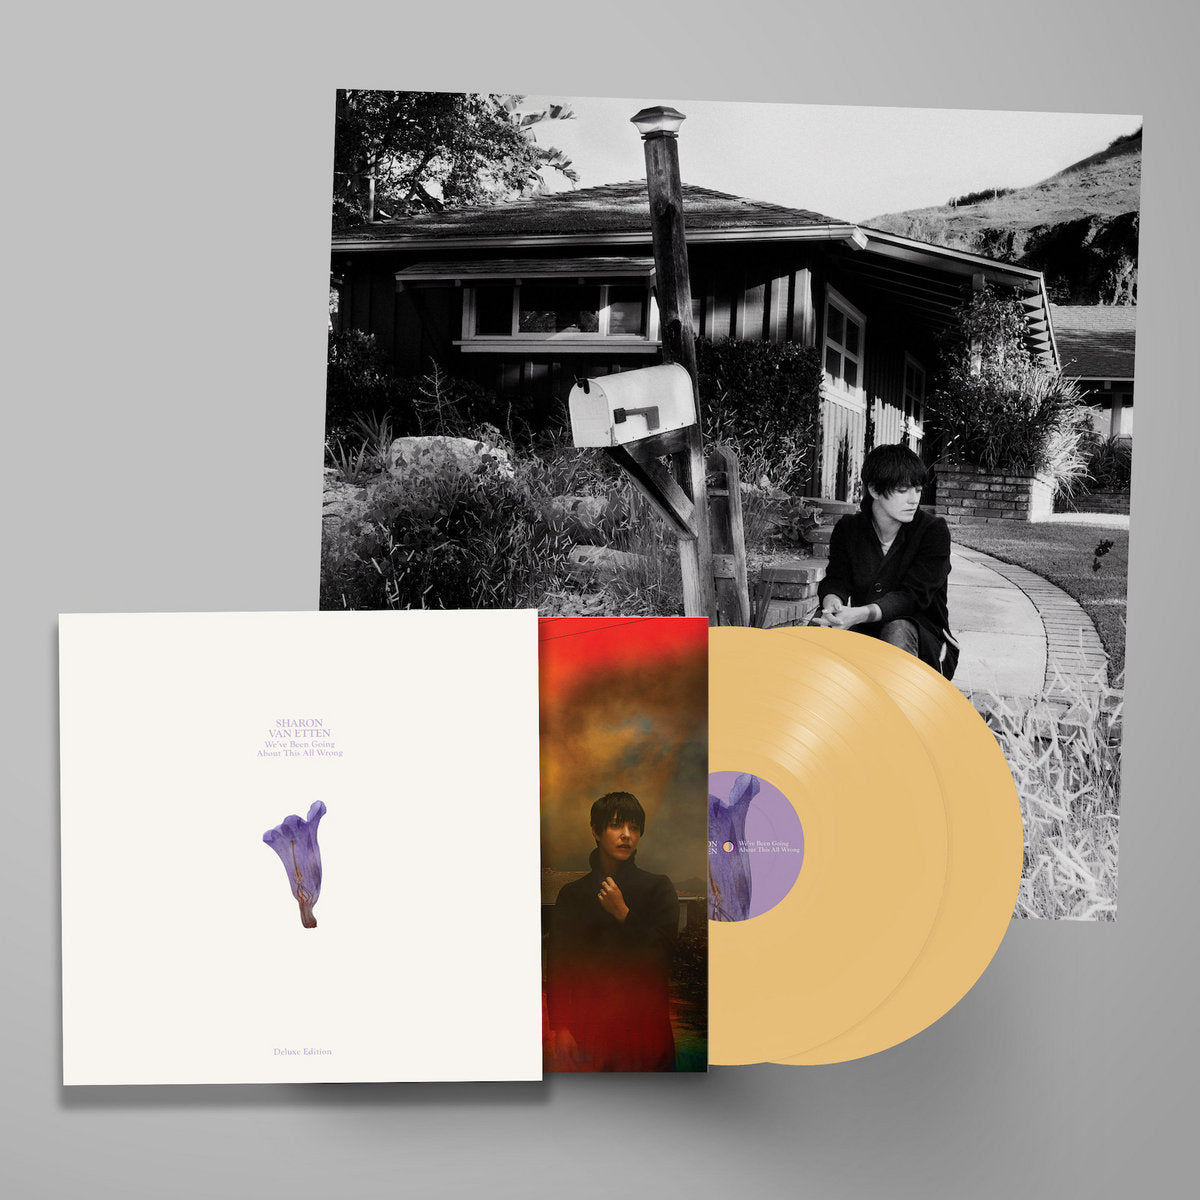 Sharon Van Etten - We've Been Going About This All Wrong "Deluxe Edition" (Double LP on Custard Vinyl + Tri-fold Jacket and more...)